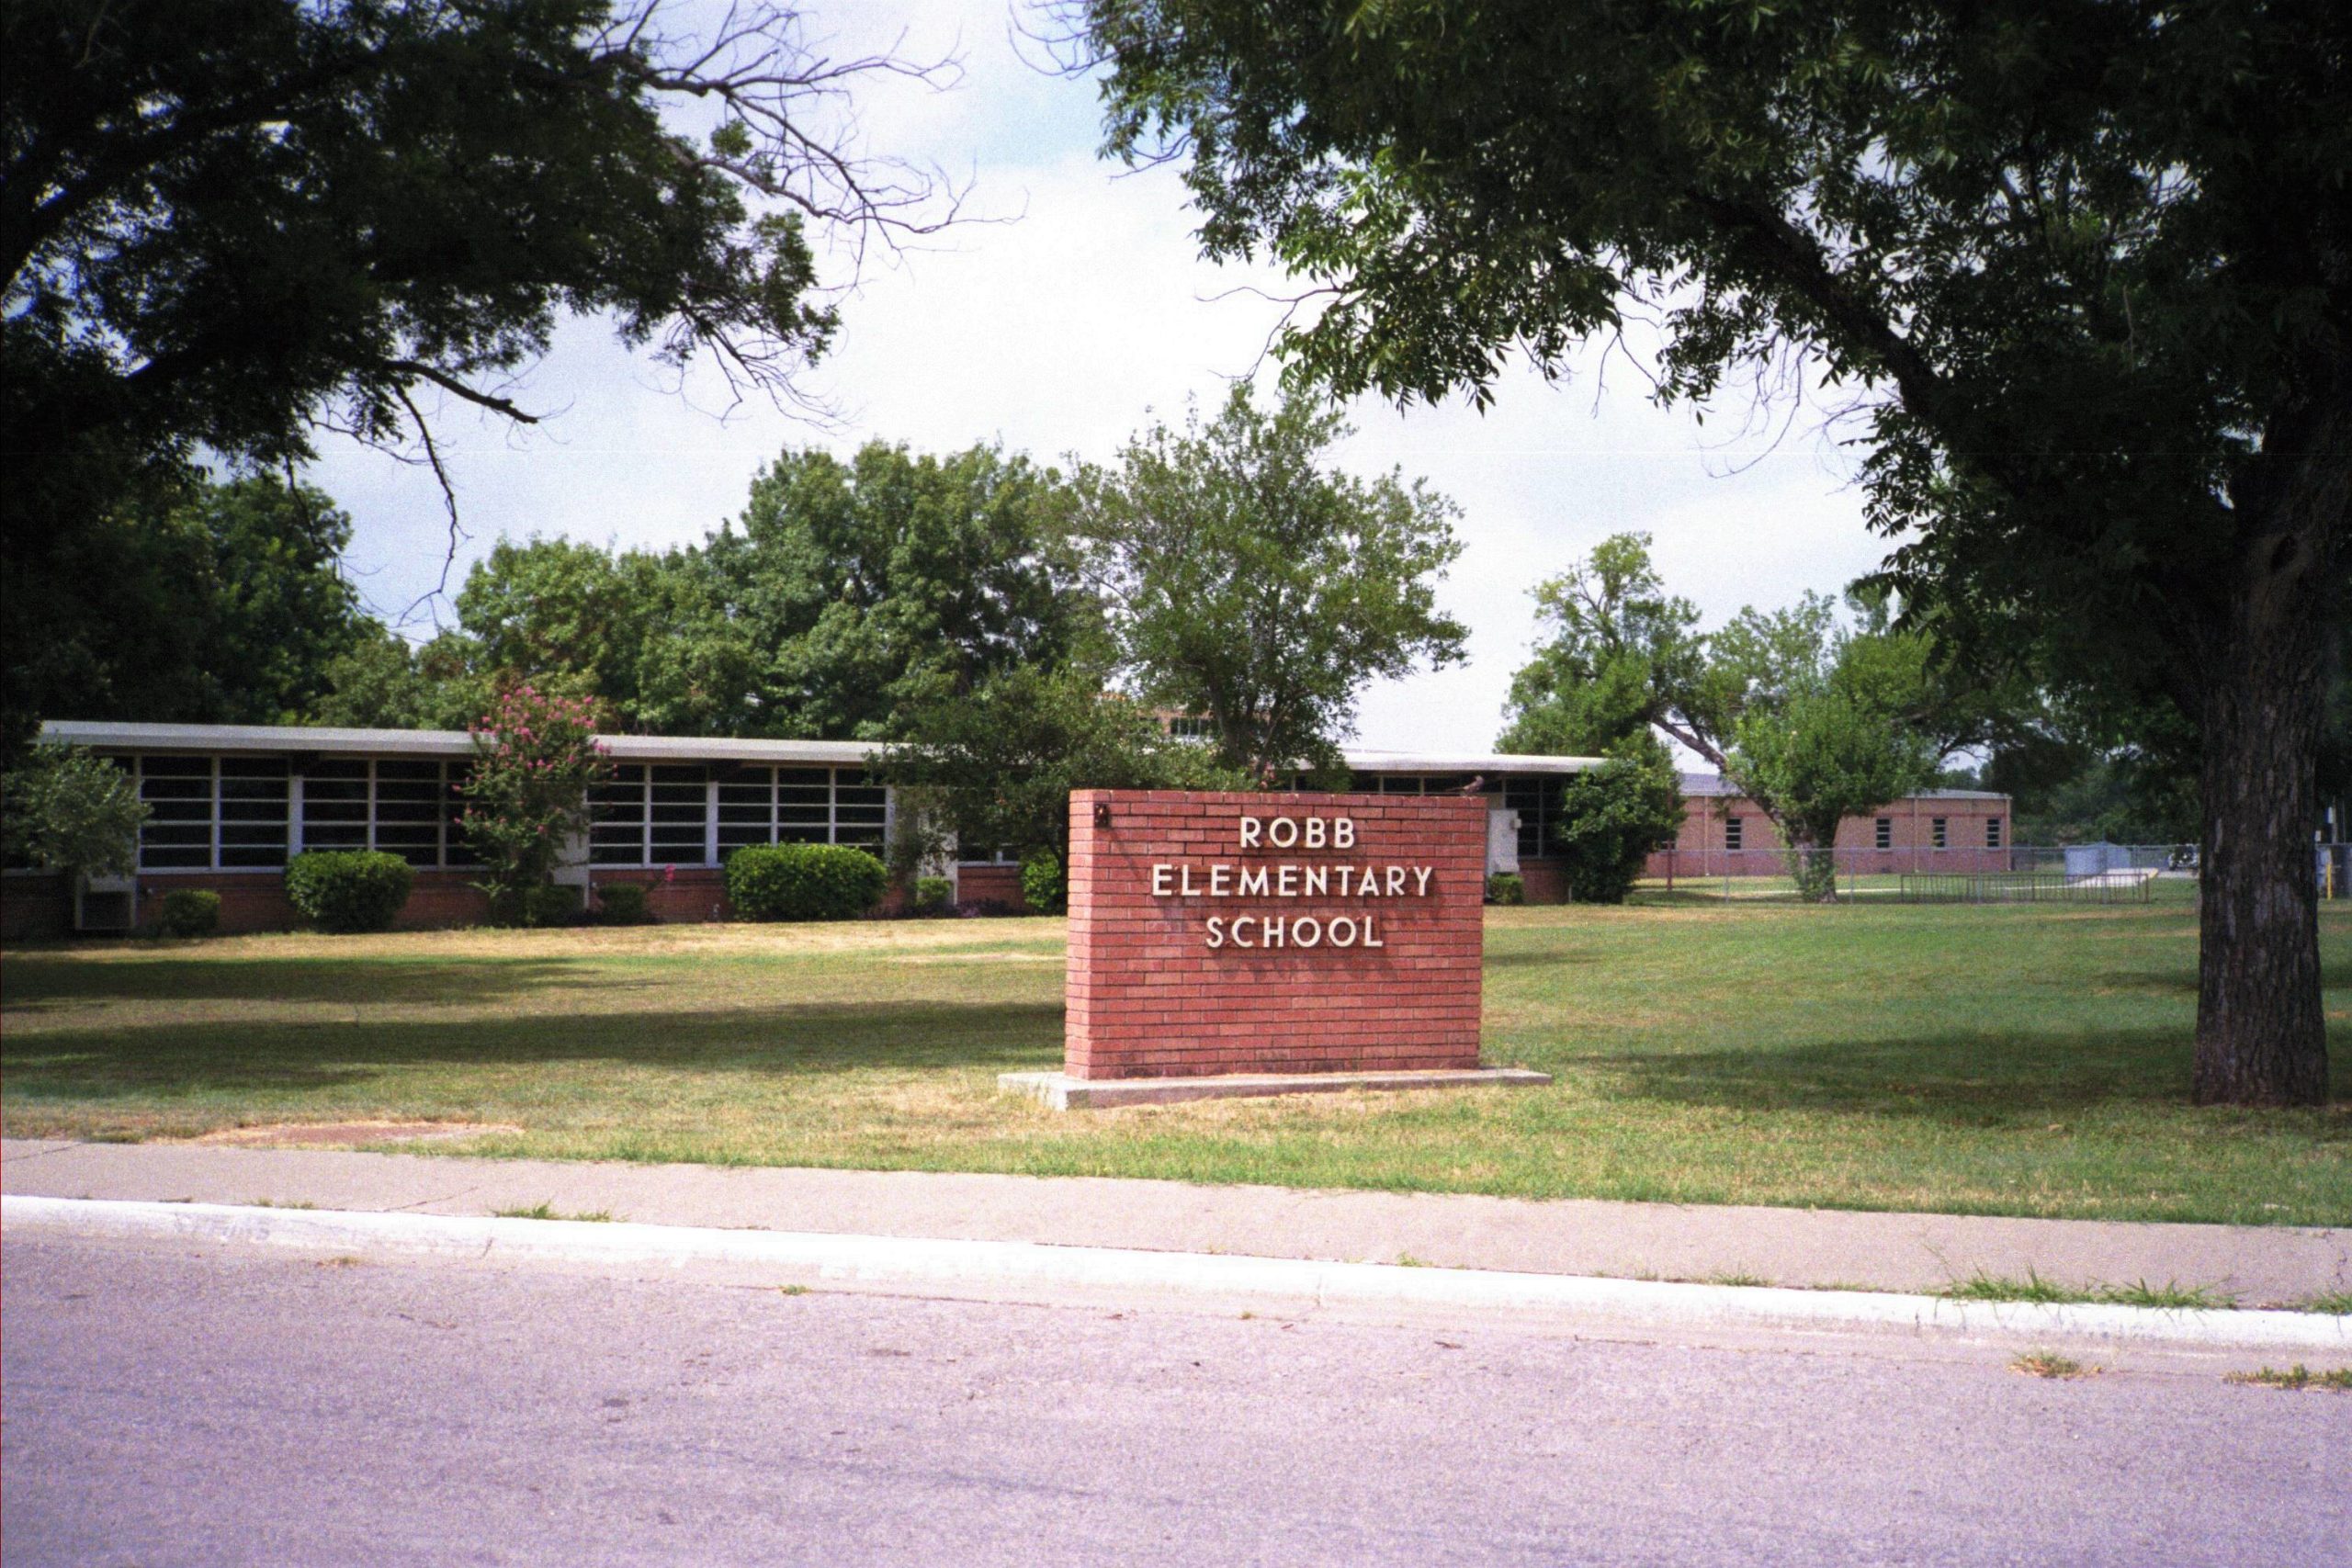 Sign of Robb Elementary School in Texas